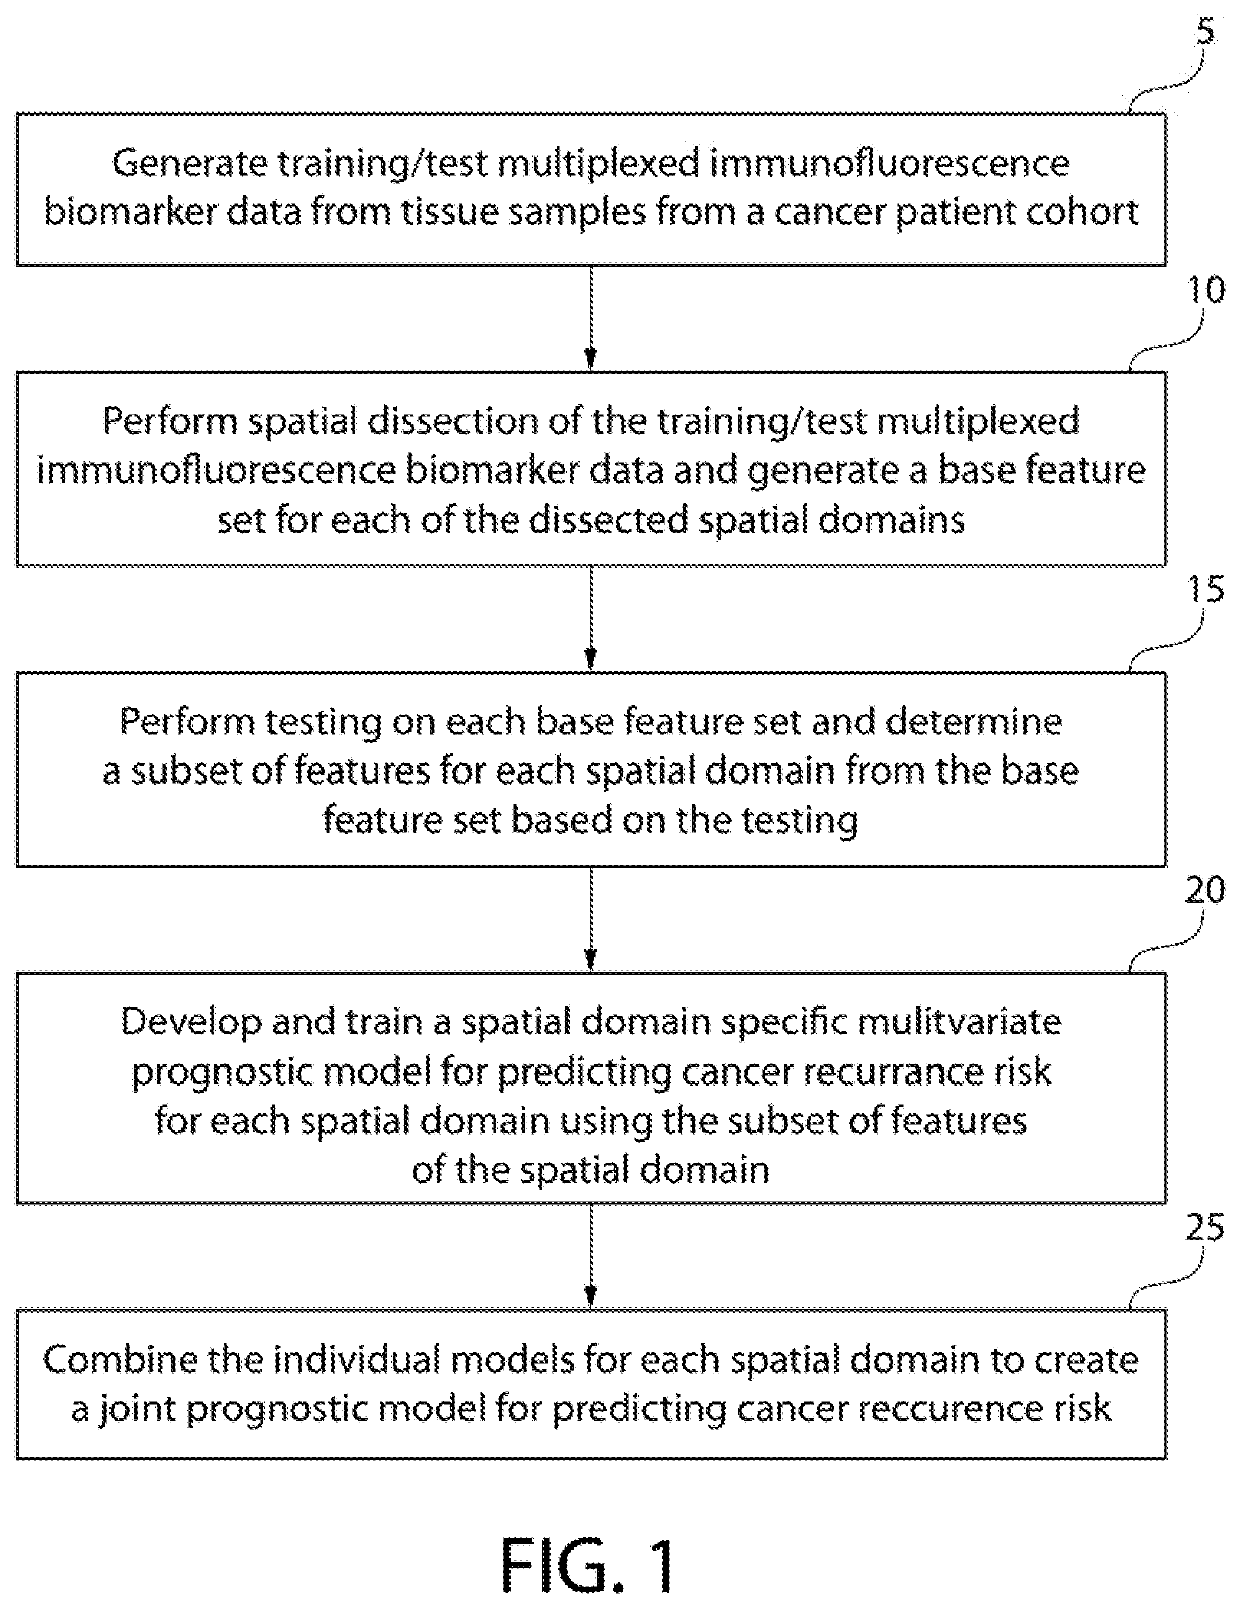 Predicting cancer recurrence from spatial multi-parameter cellular and subcellular imaging data